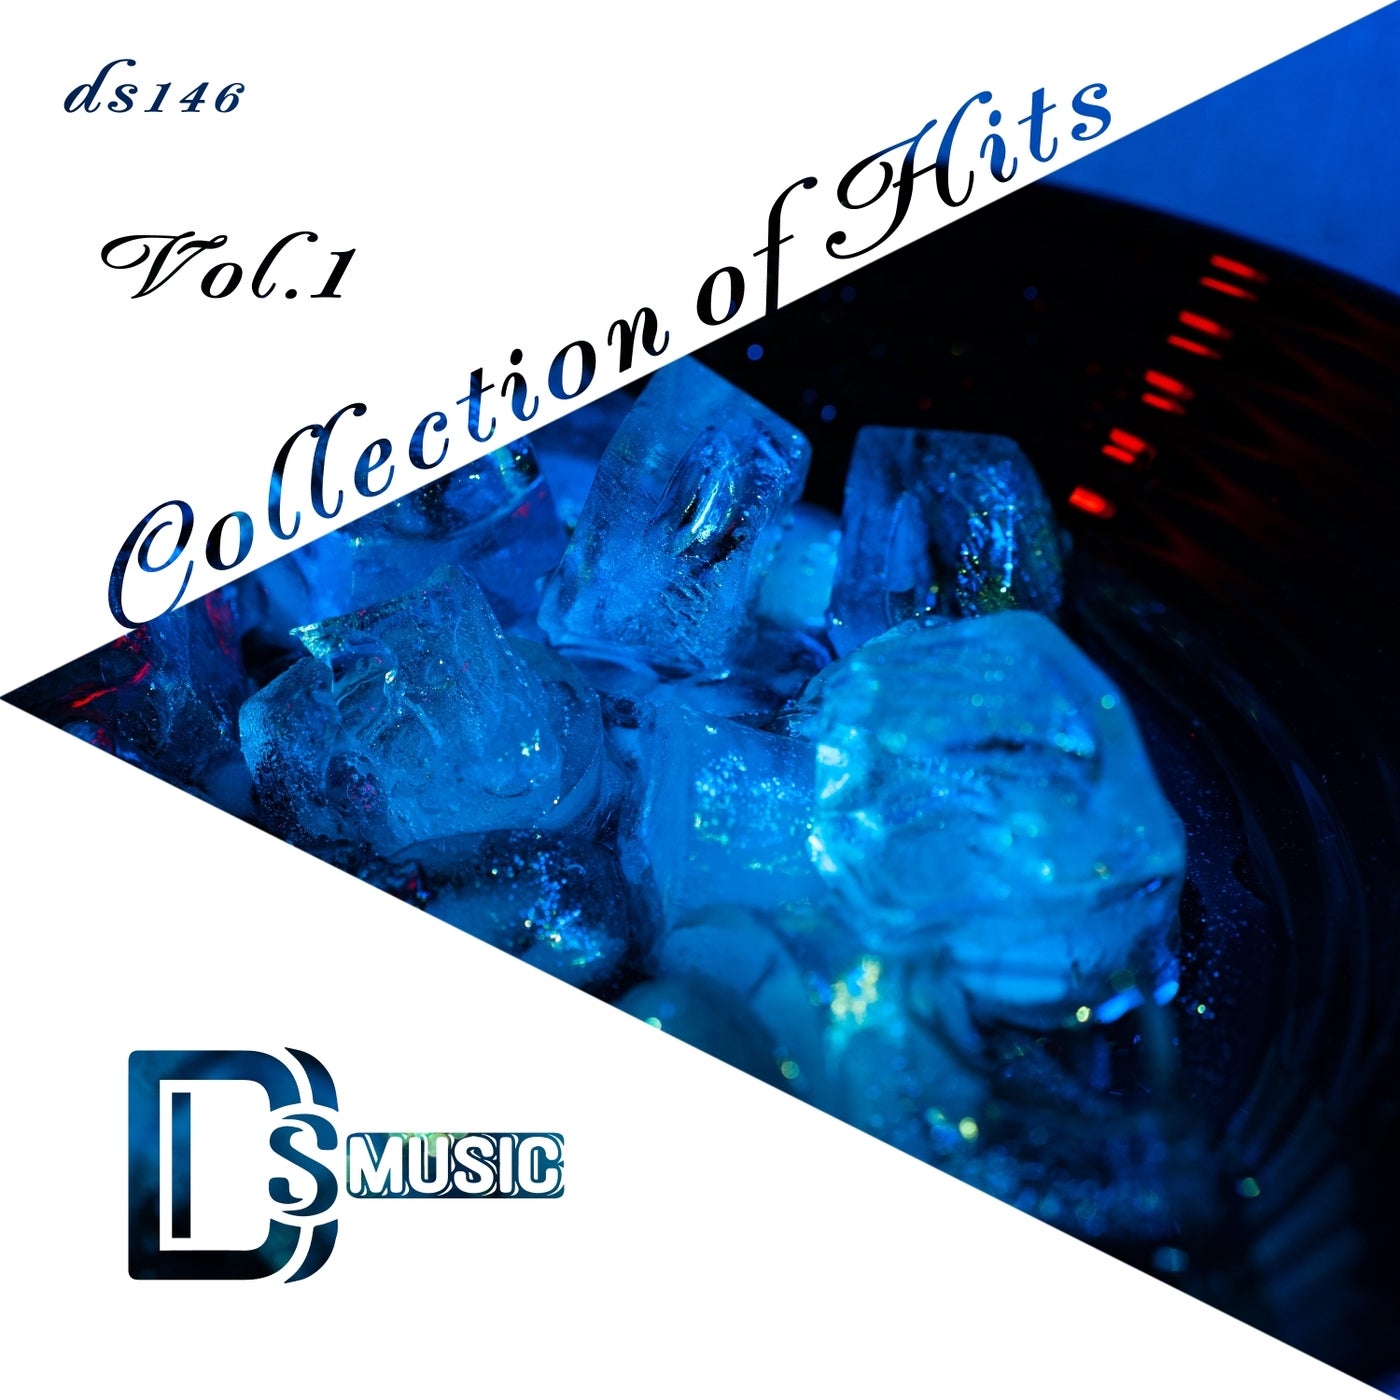 Collection of Hits, Vol. 1